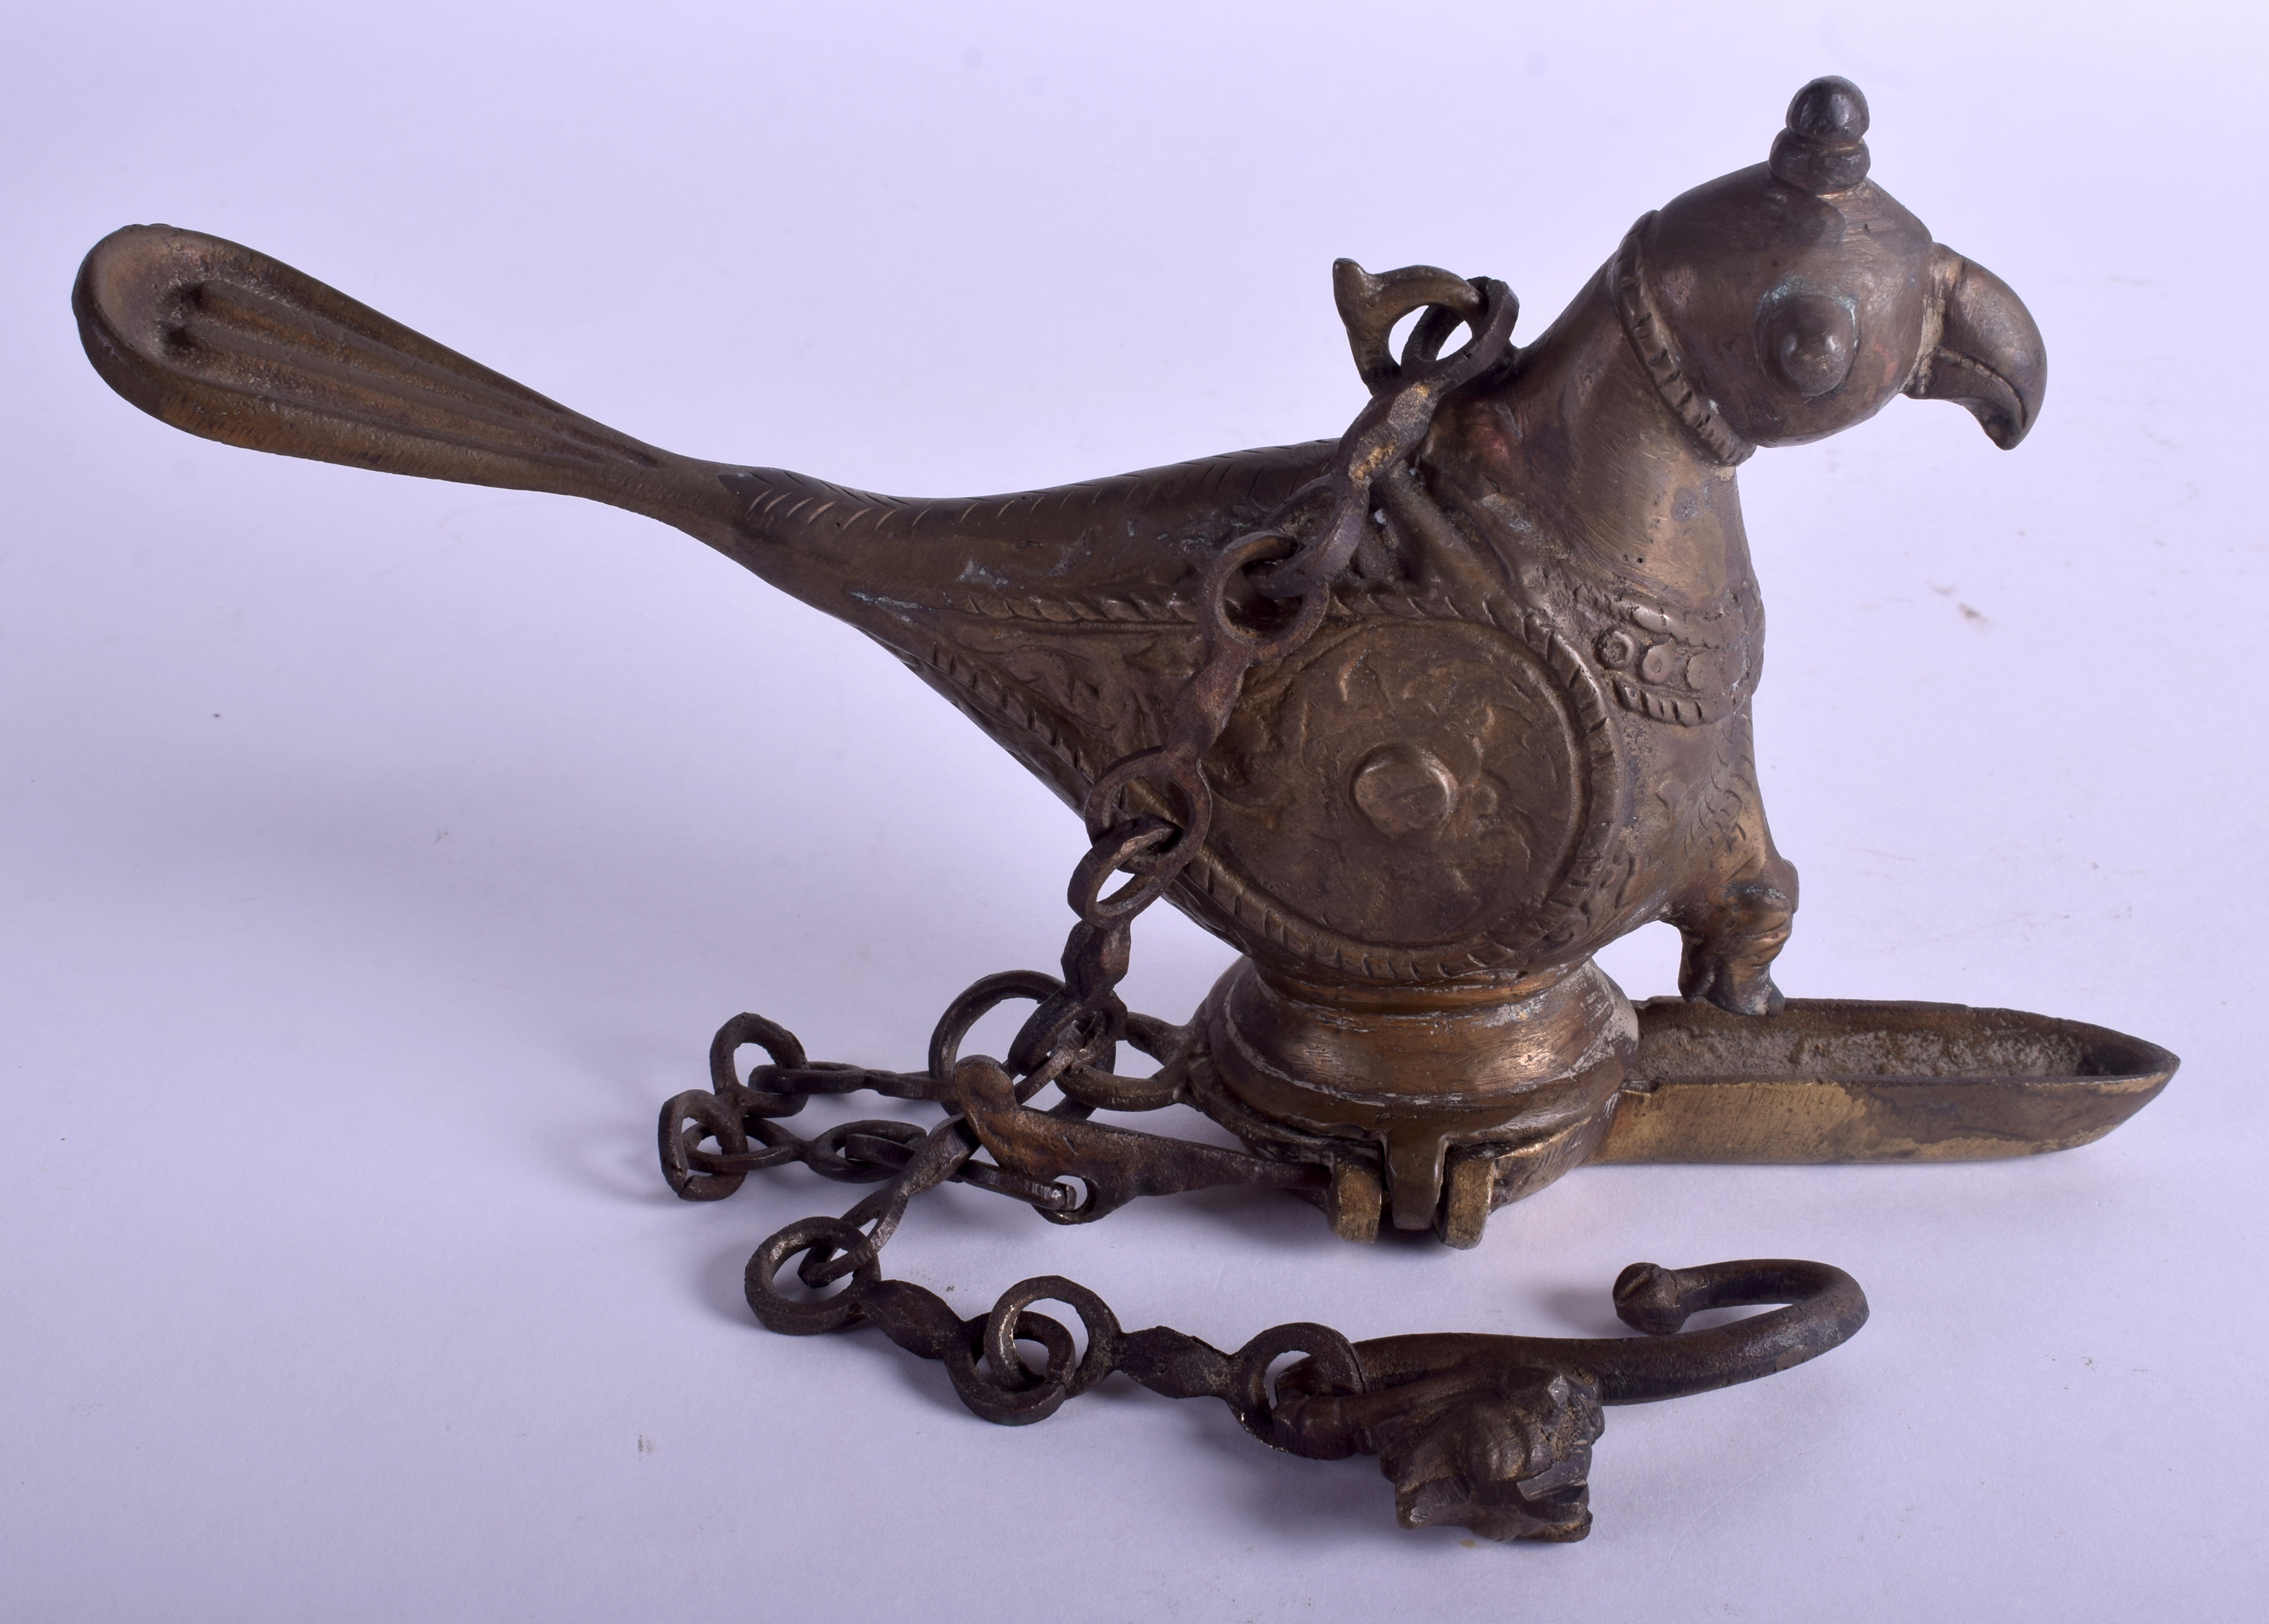 AN INDIAN BRONZE HANGING OIL LAMP formed with a bird. 22 cm x 14 cm.